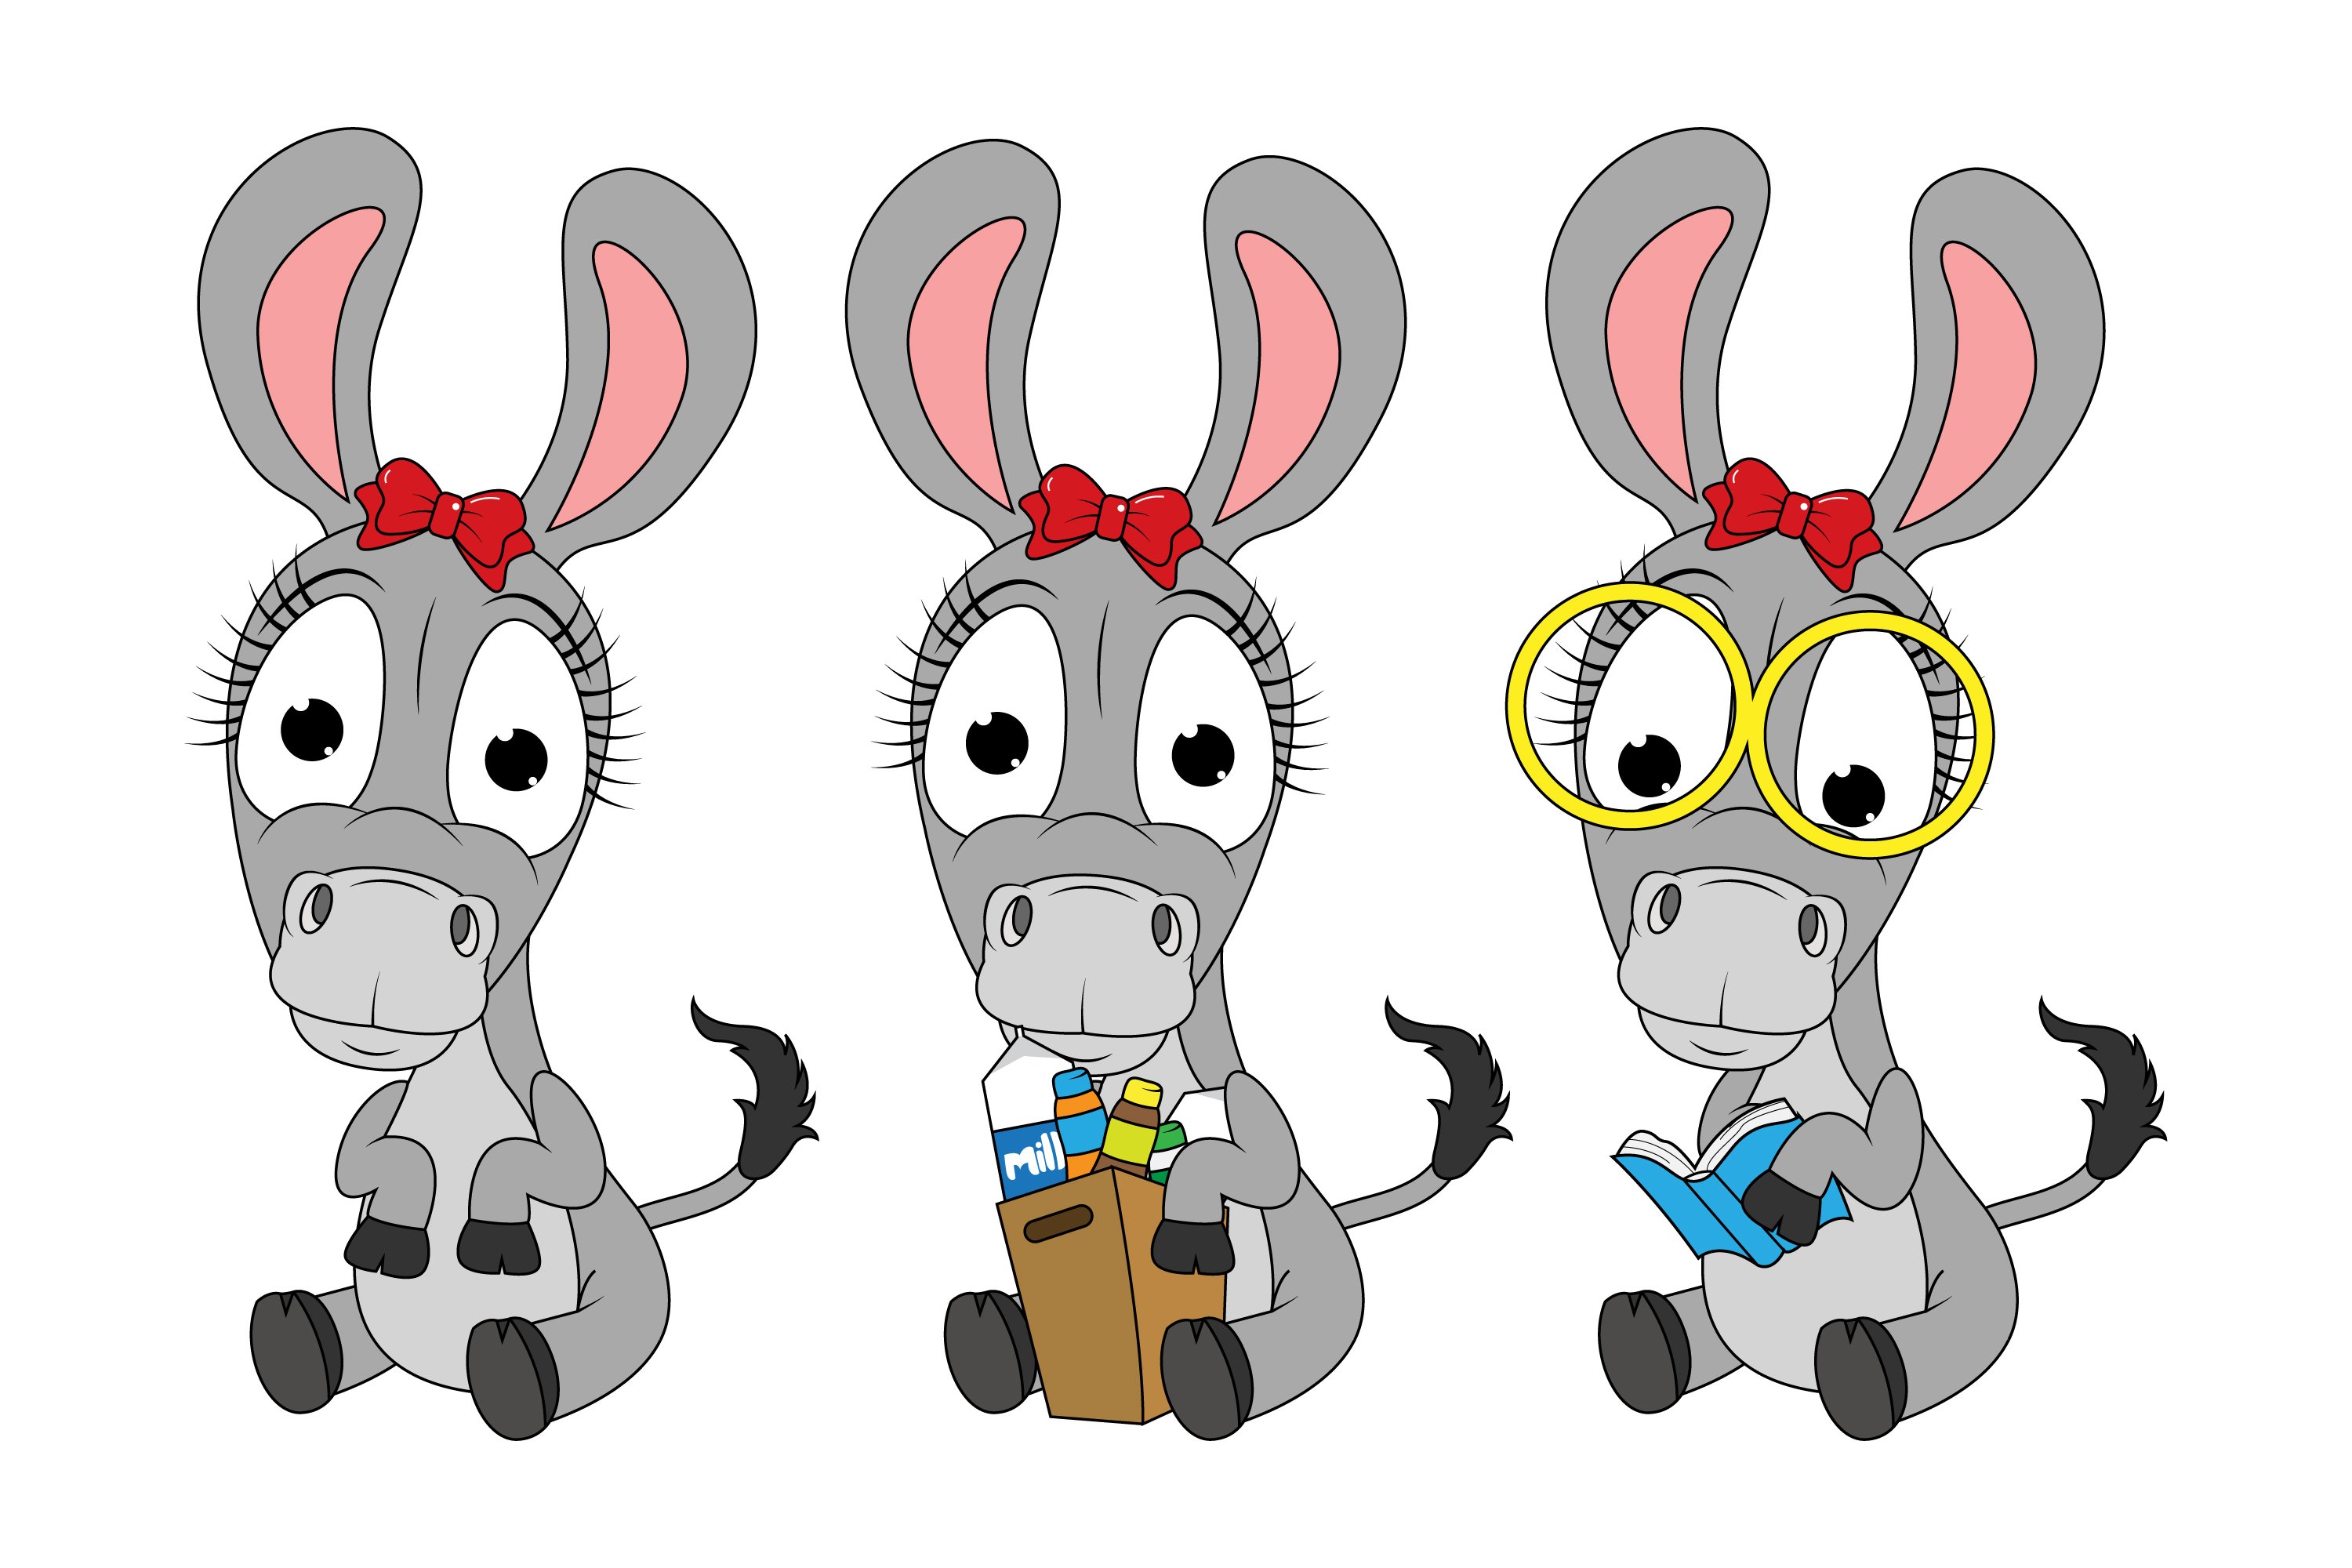 So cute donkey in the different looks.